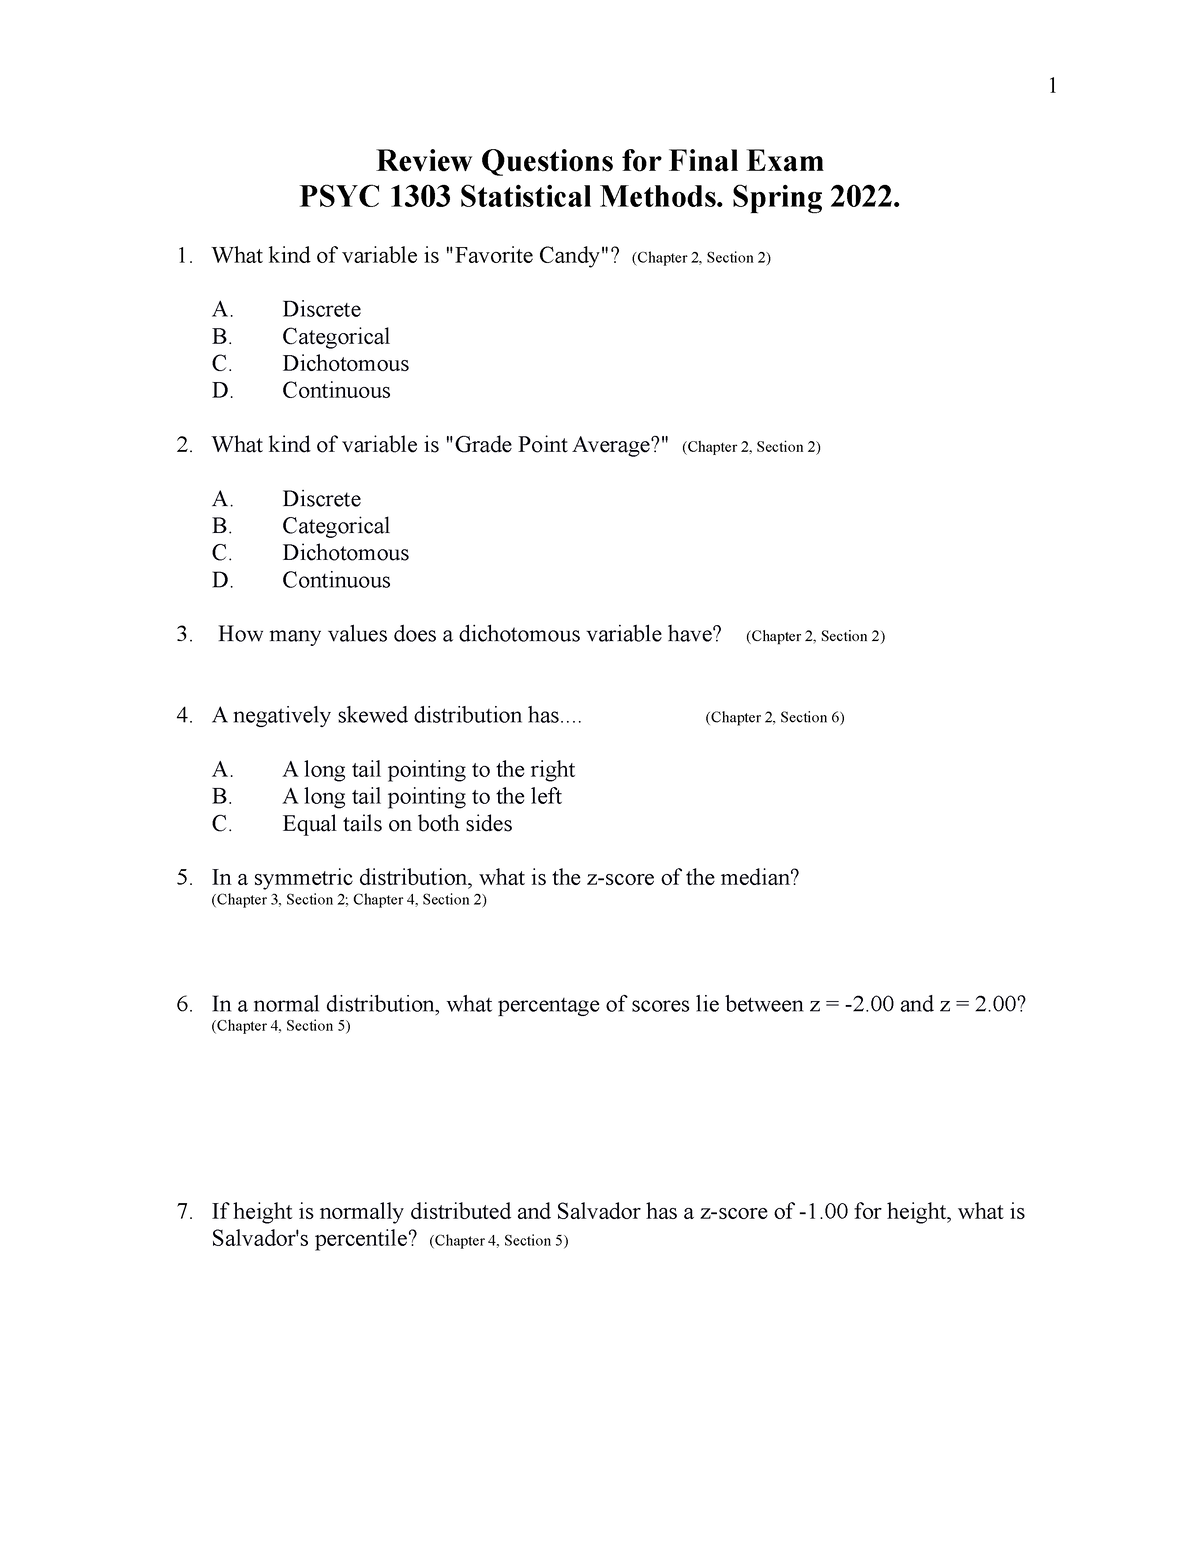 Review Questions for Final Exam Spring 2022 Review Questions for